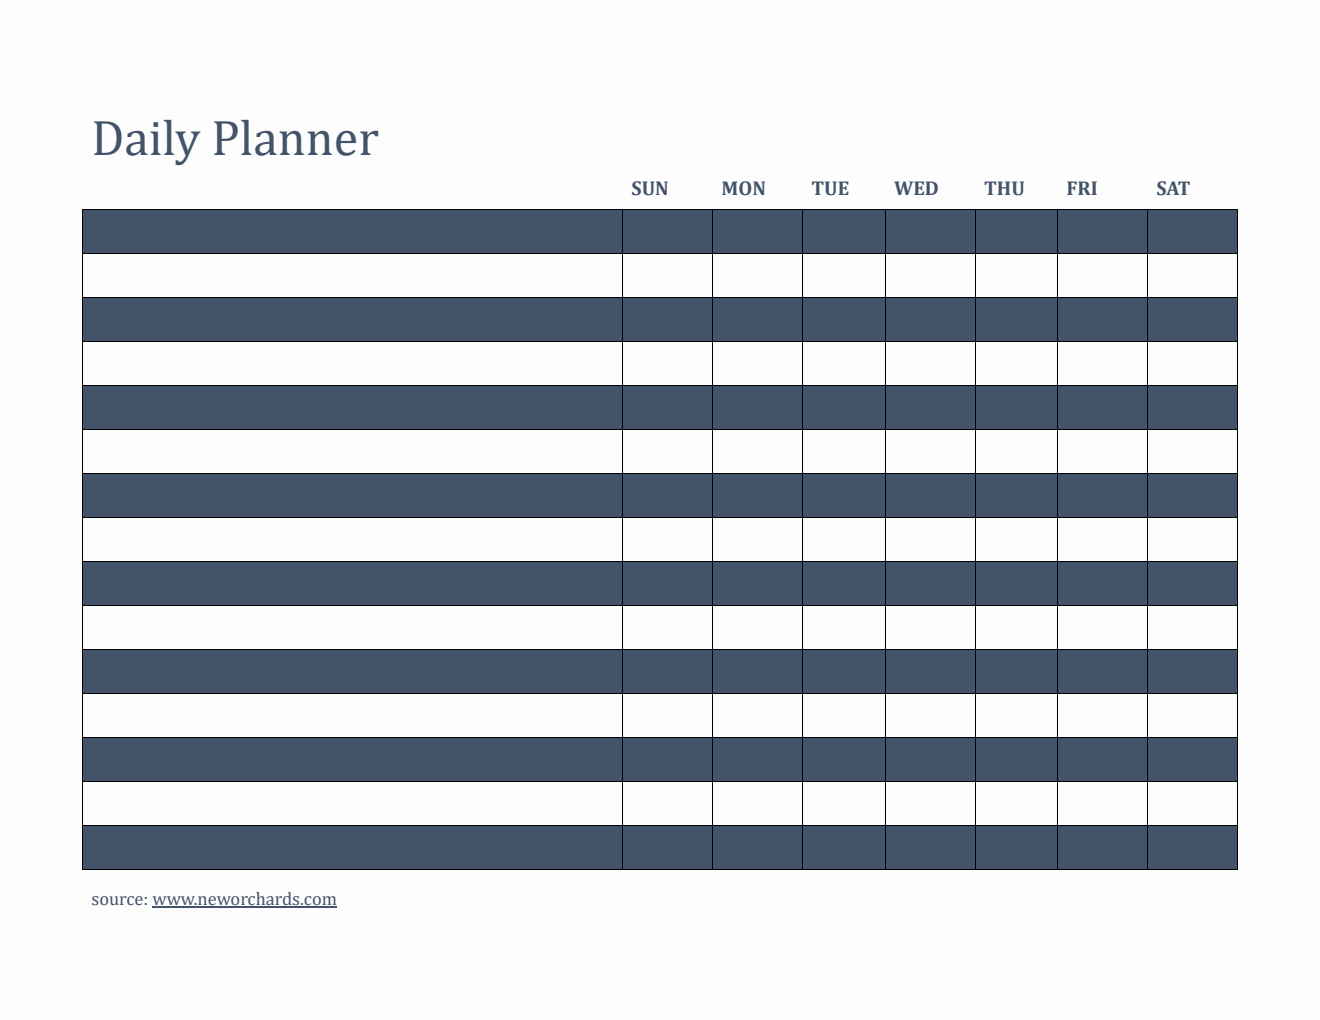 Daily Planner and Checklist Template in PDF (Striped)